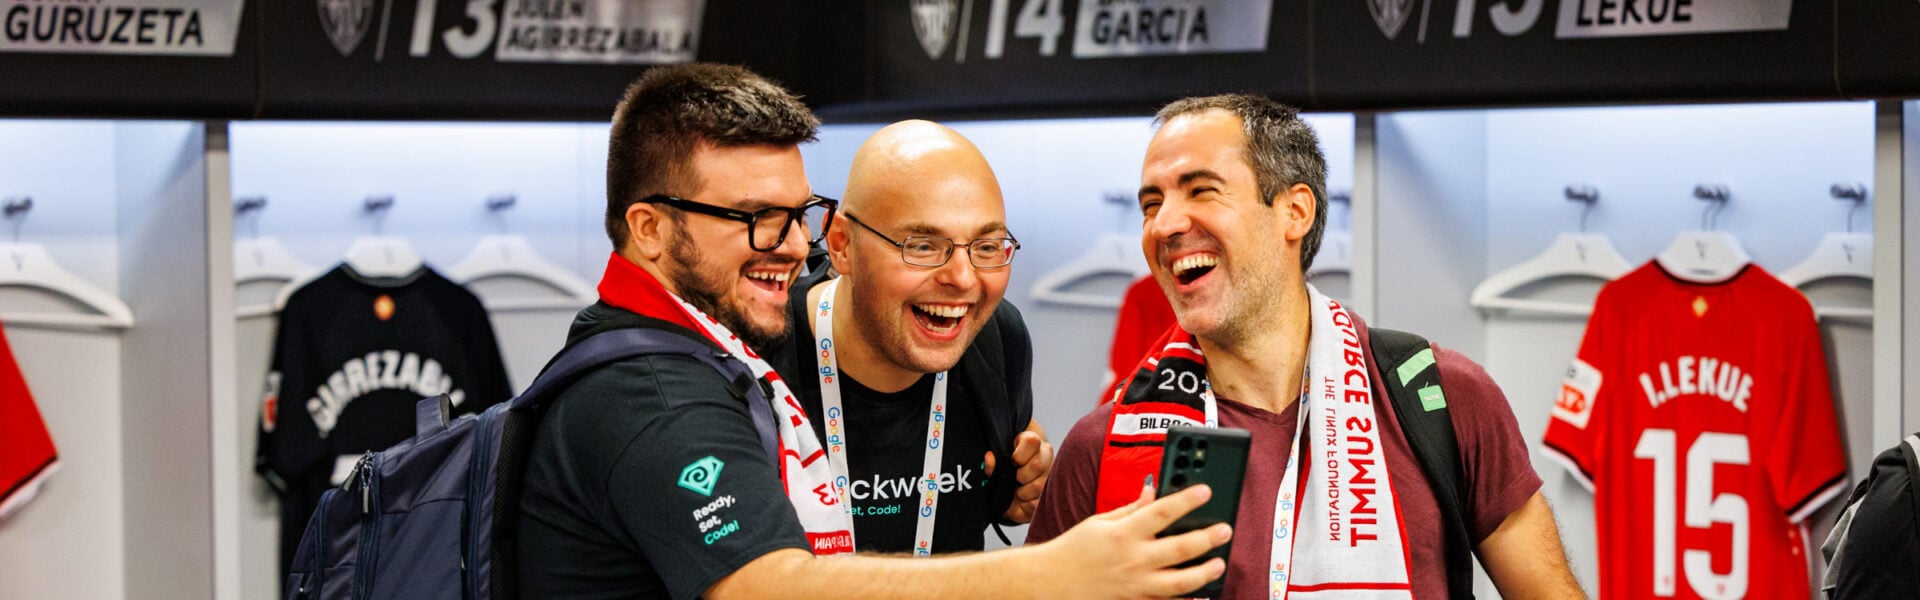 Three men laughing at something on a phone in a fútbol locker room, wearing Open Source Summit fútbol scarves.